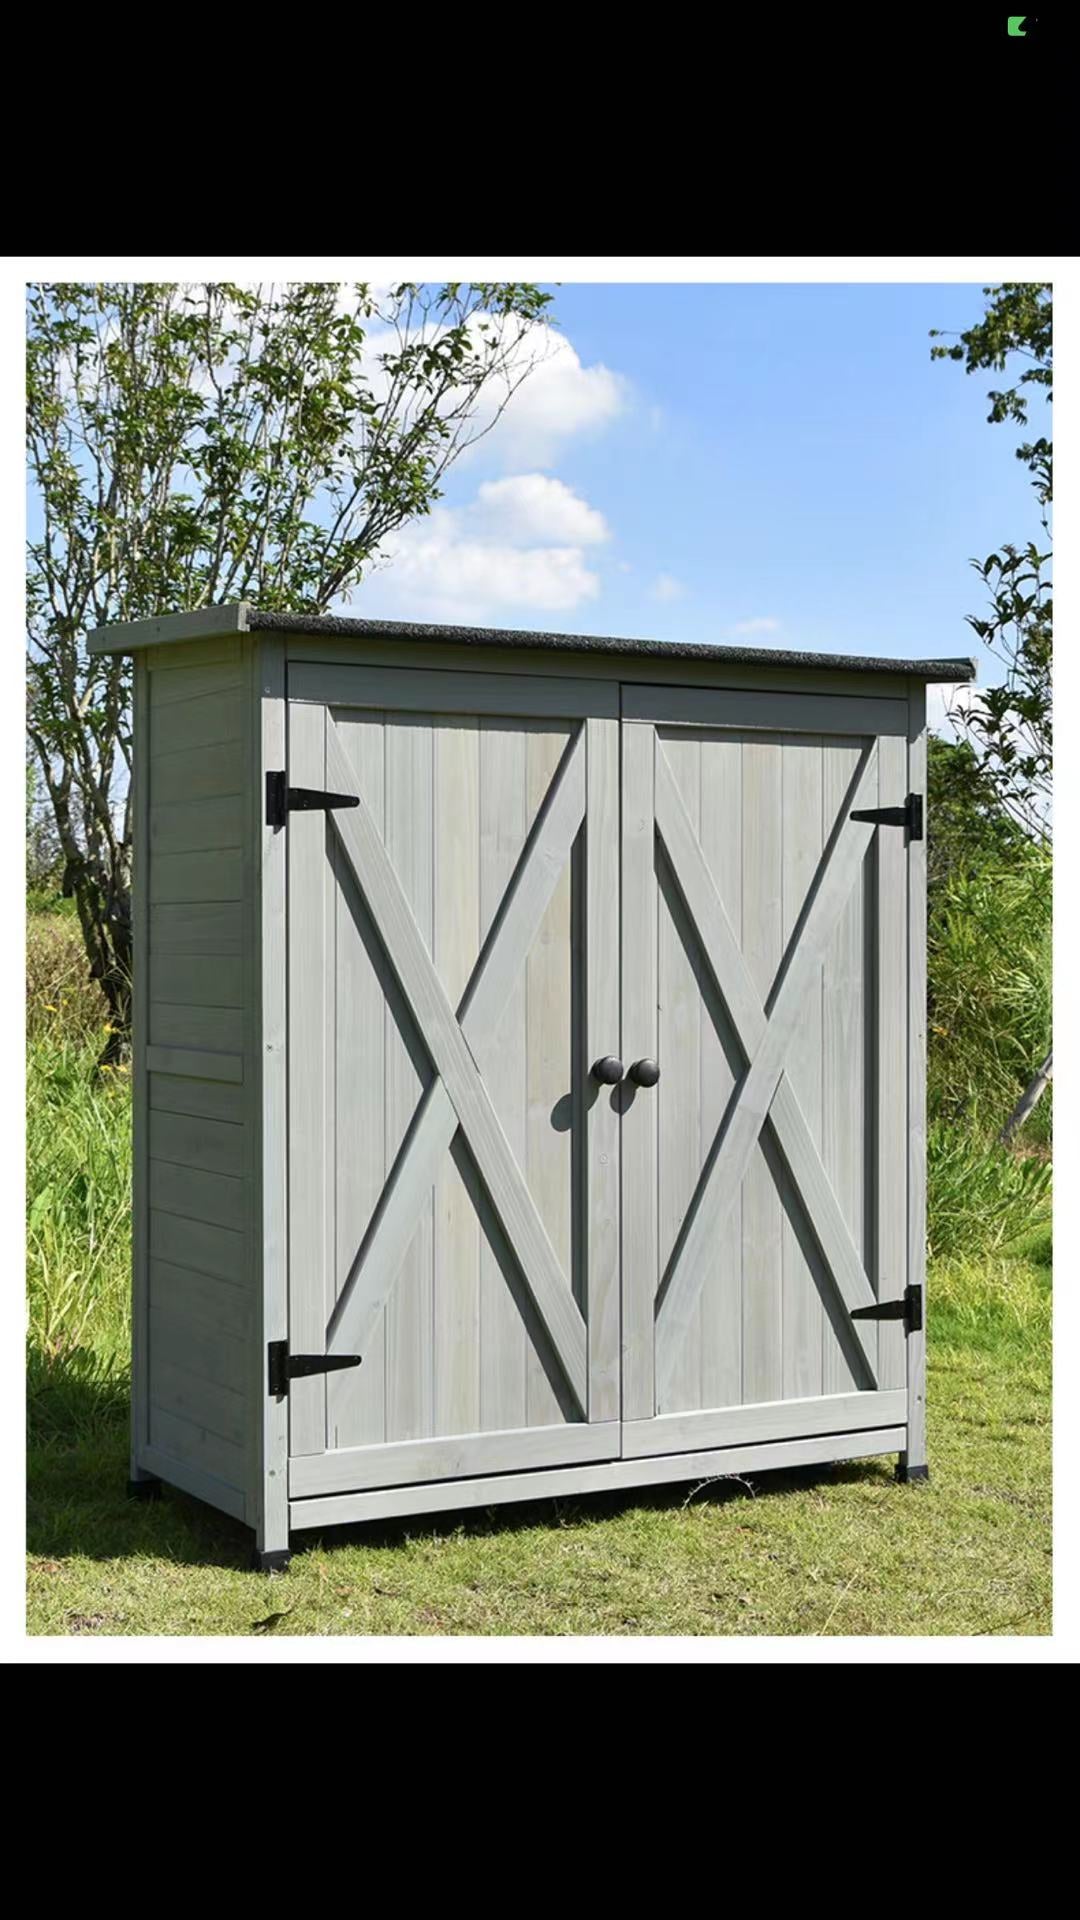 Solid Wood Tools Shed - 4 Seasons Home Gadgets